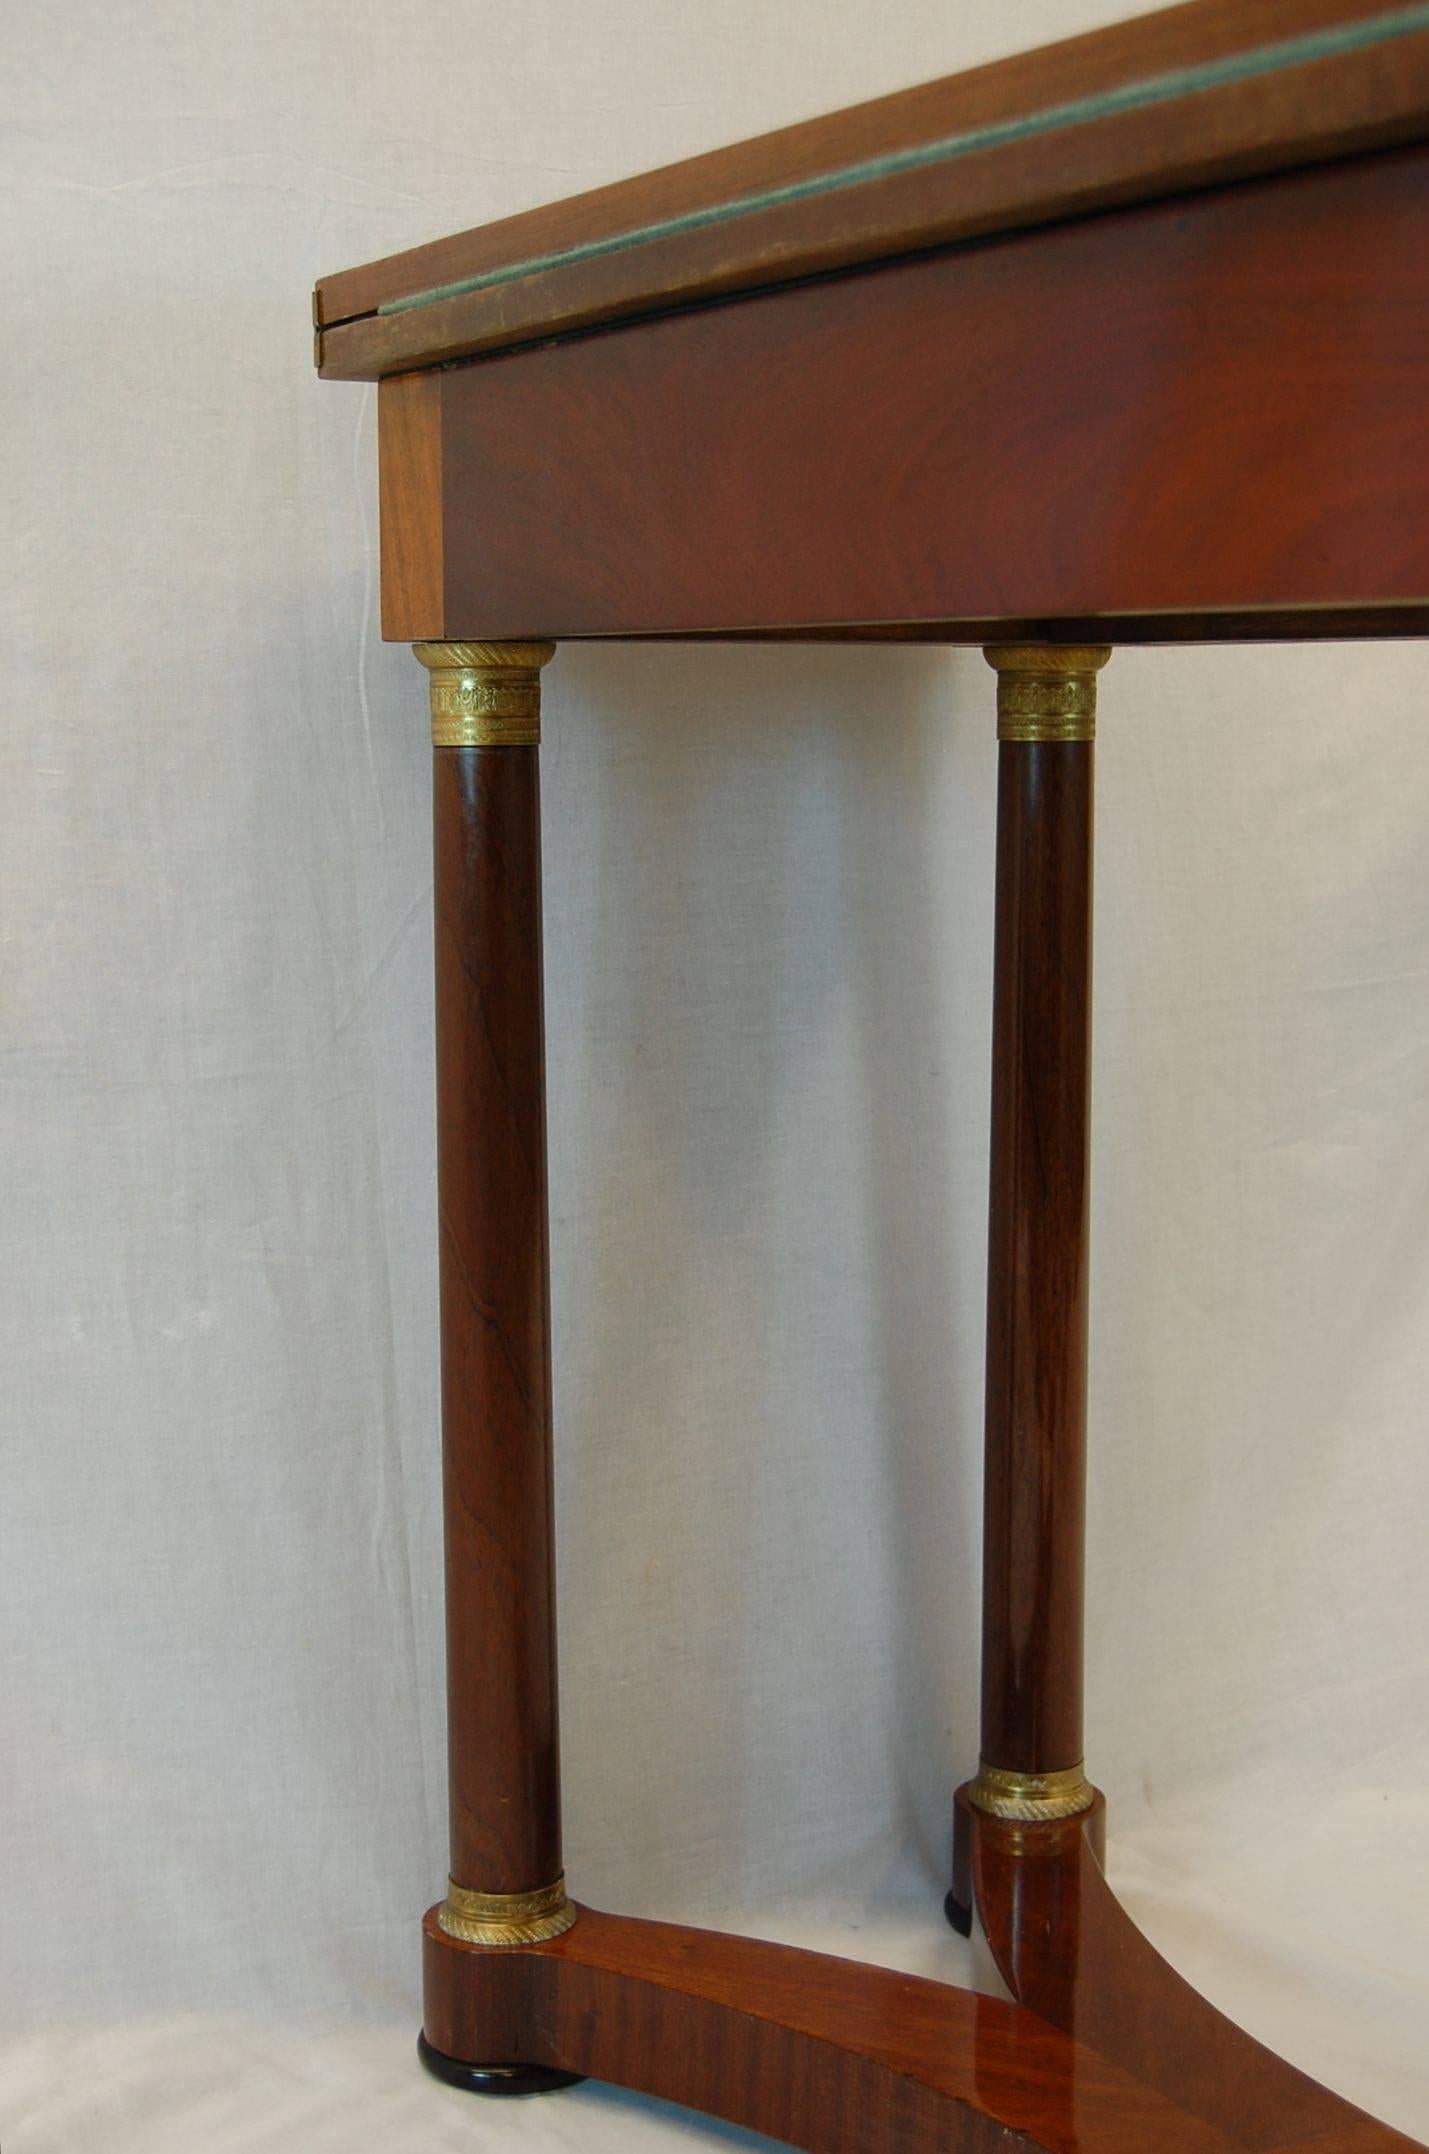 Hand-Crafted Mahogany Flip-Top Card Table with Leather Insert, circa 1880